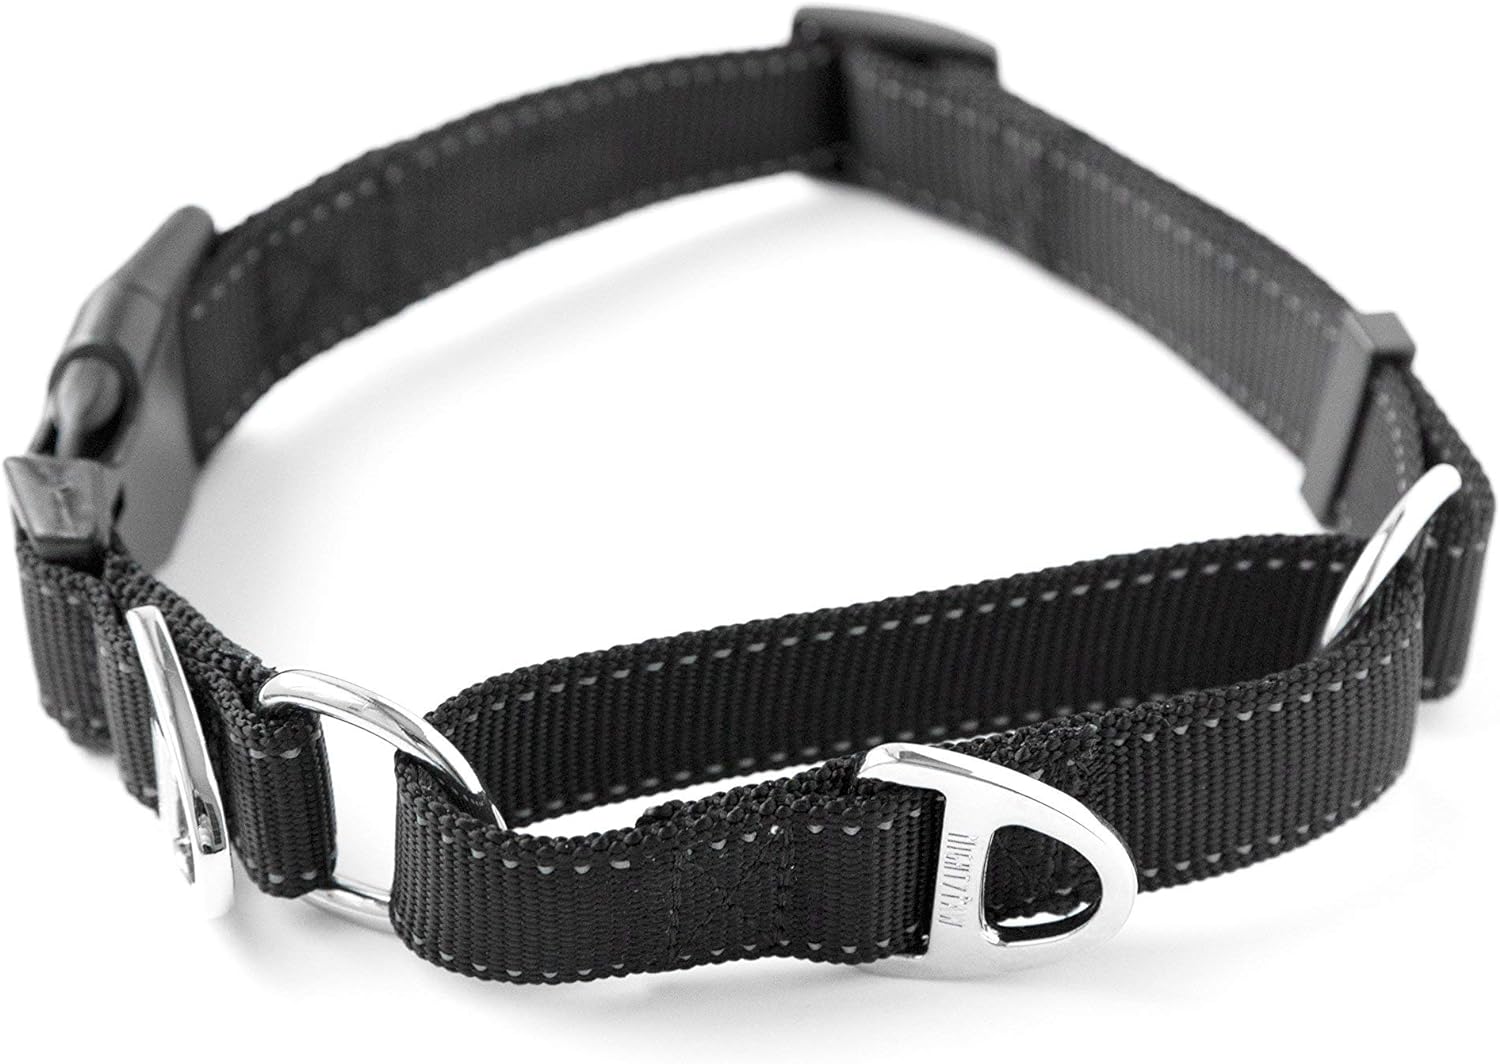 Mighty Paw Martingale Nylon Training Collar with Buckle - Limited Slip Design for Controlled - Optimal Pet Training - Enhanced with Reflective Stitching for Safety - Escape Proof Dog Collar - Black